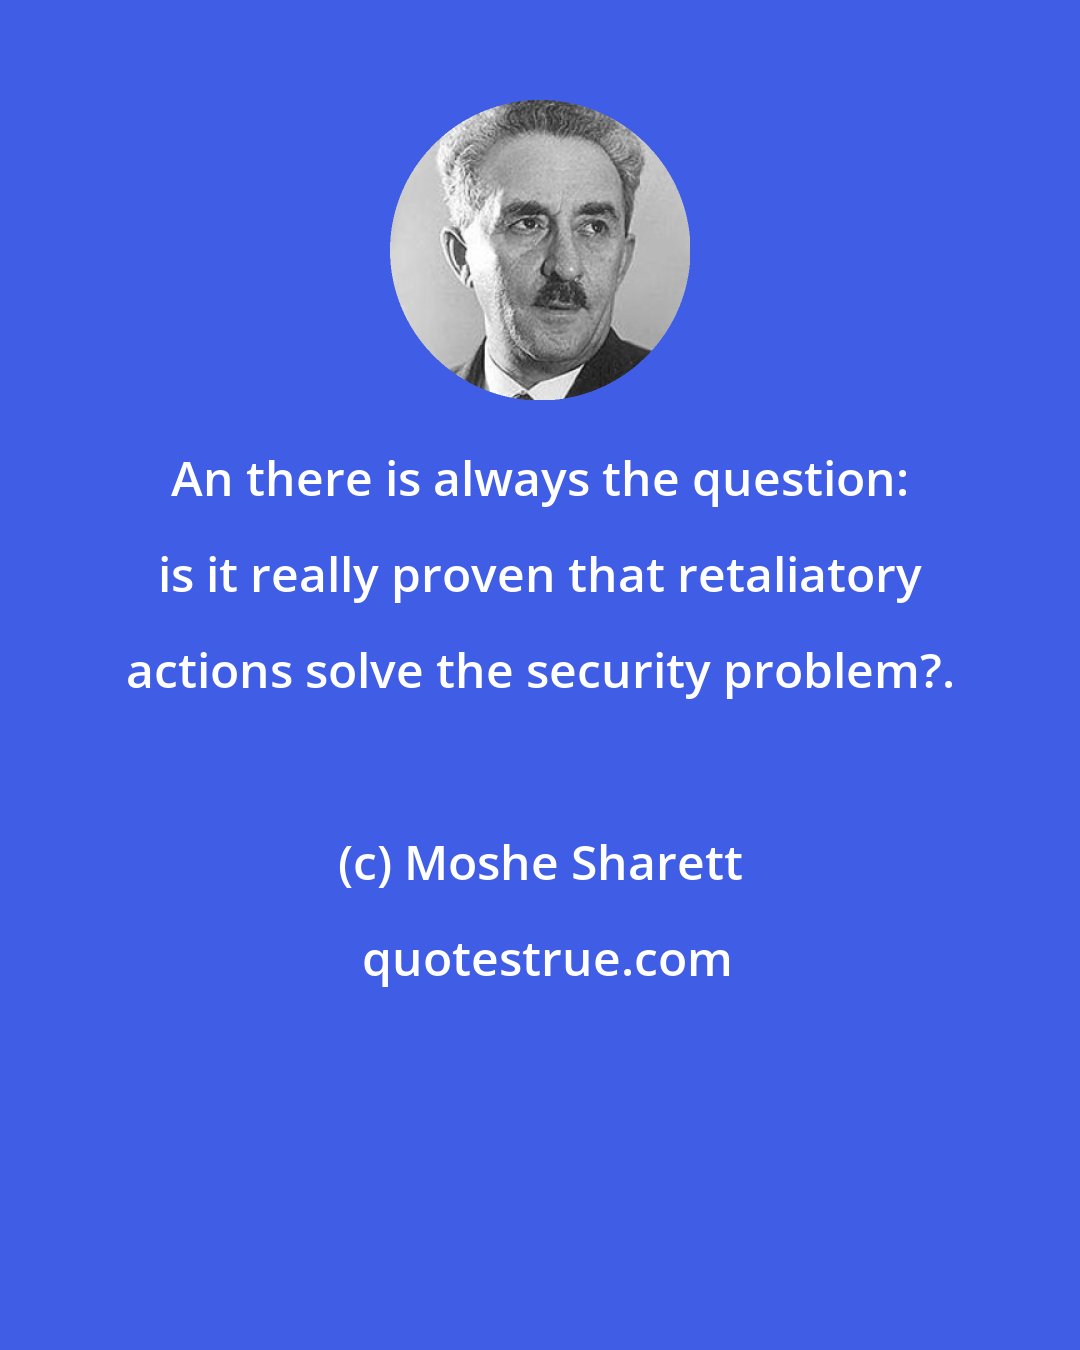 Moshe Sharett: An there is always the question: is it really proven that retaliatory actions solve the security problem?.